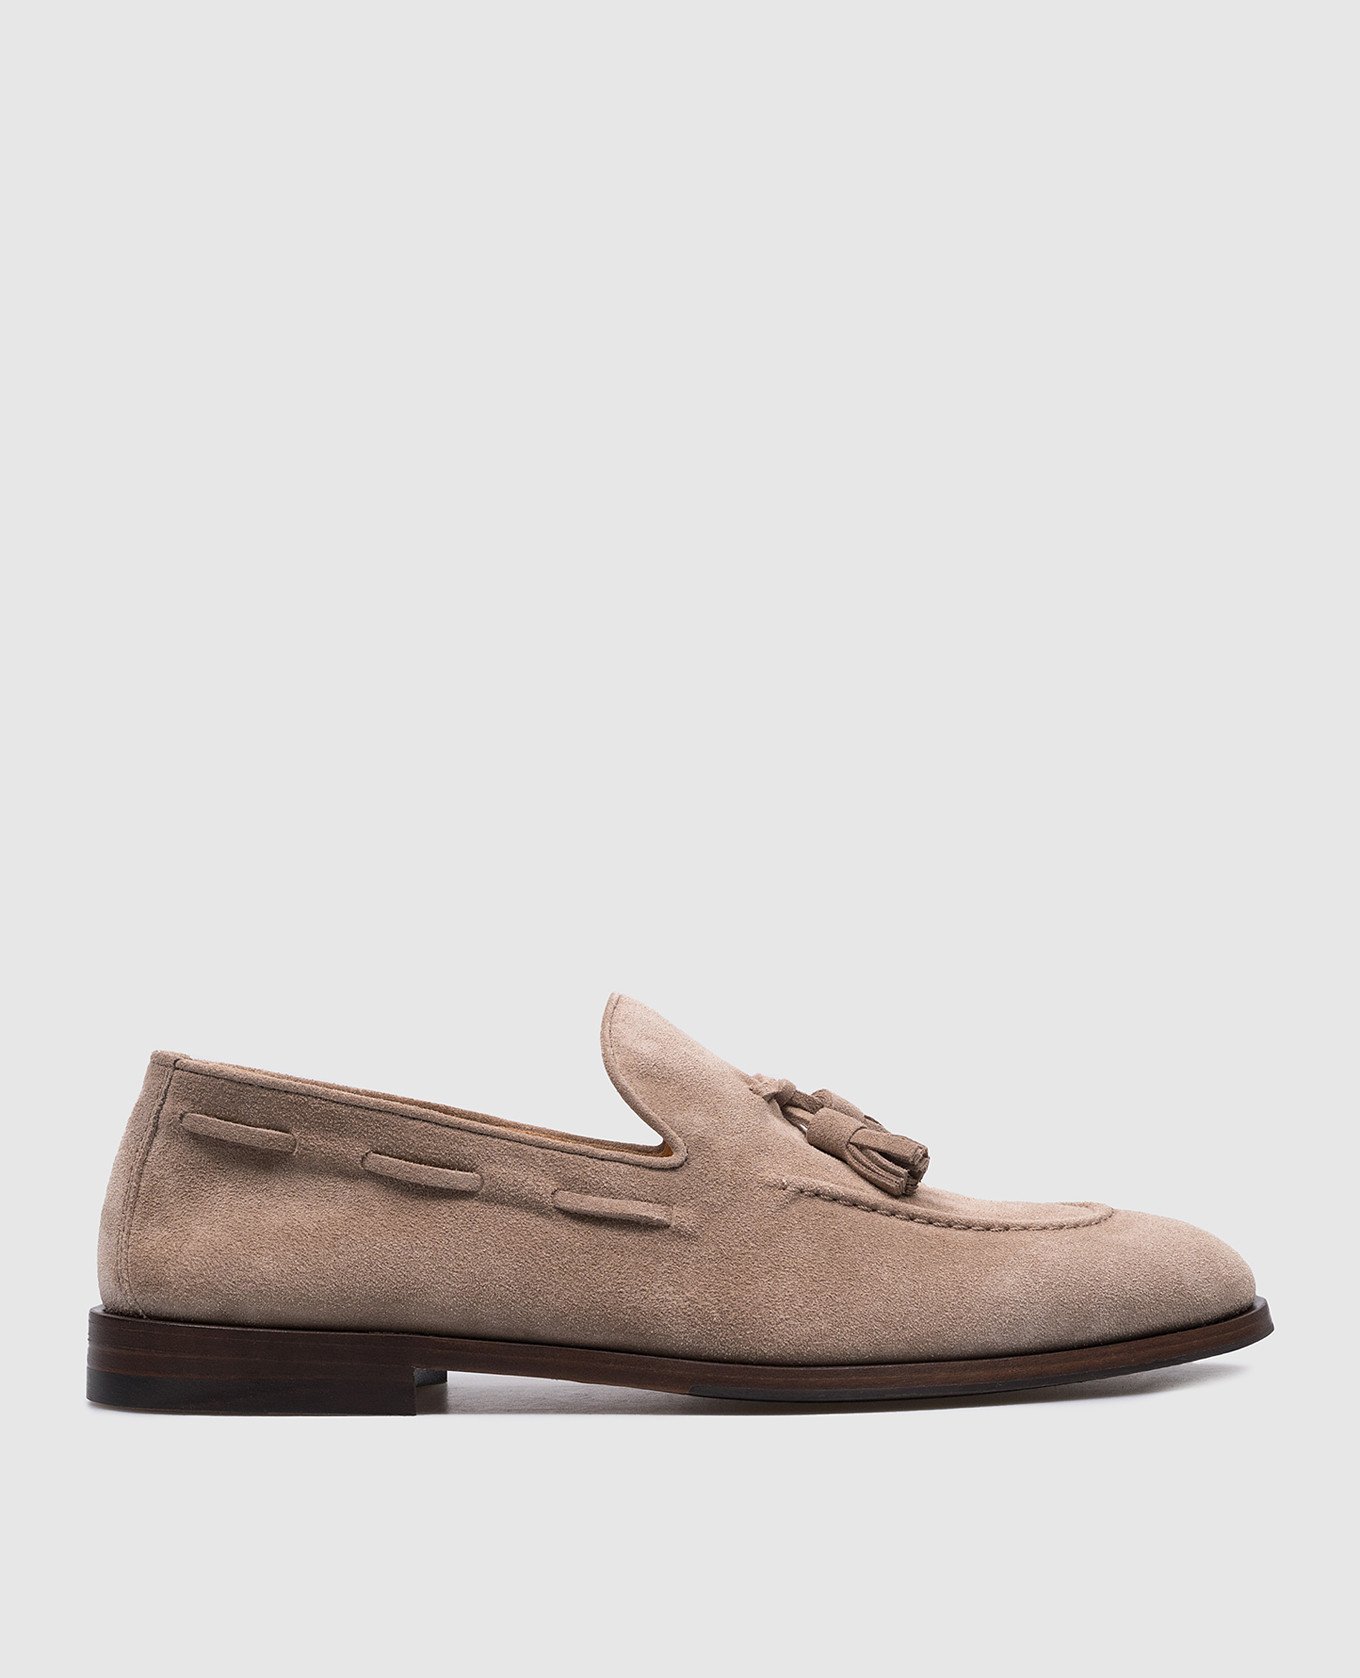 Beige suede loafers with tassels